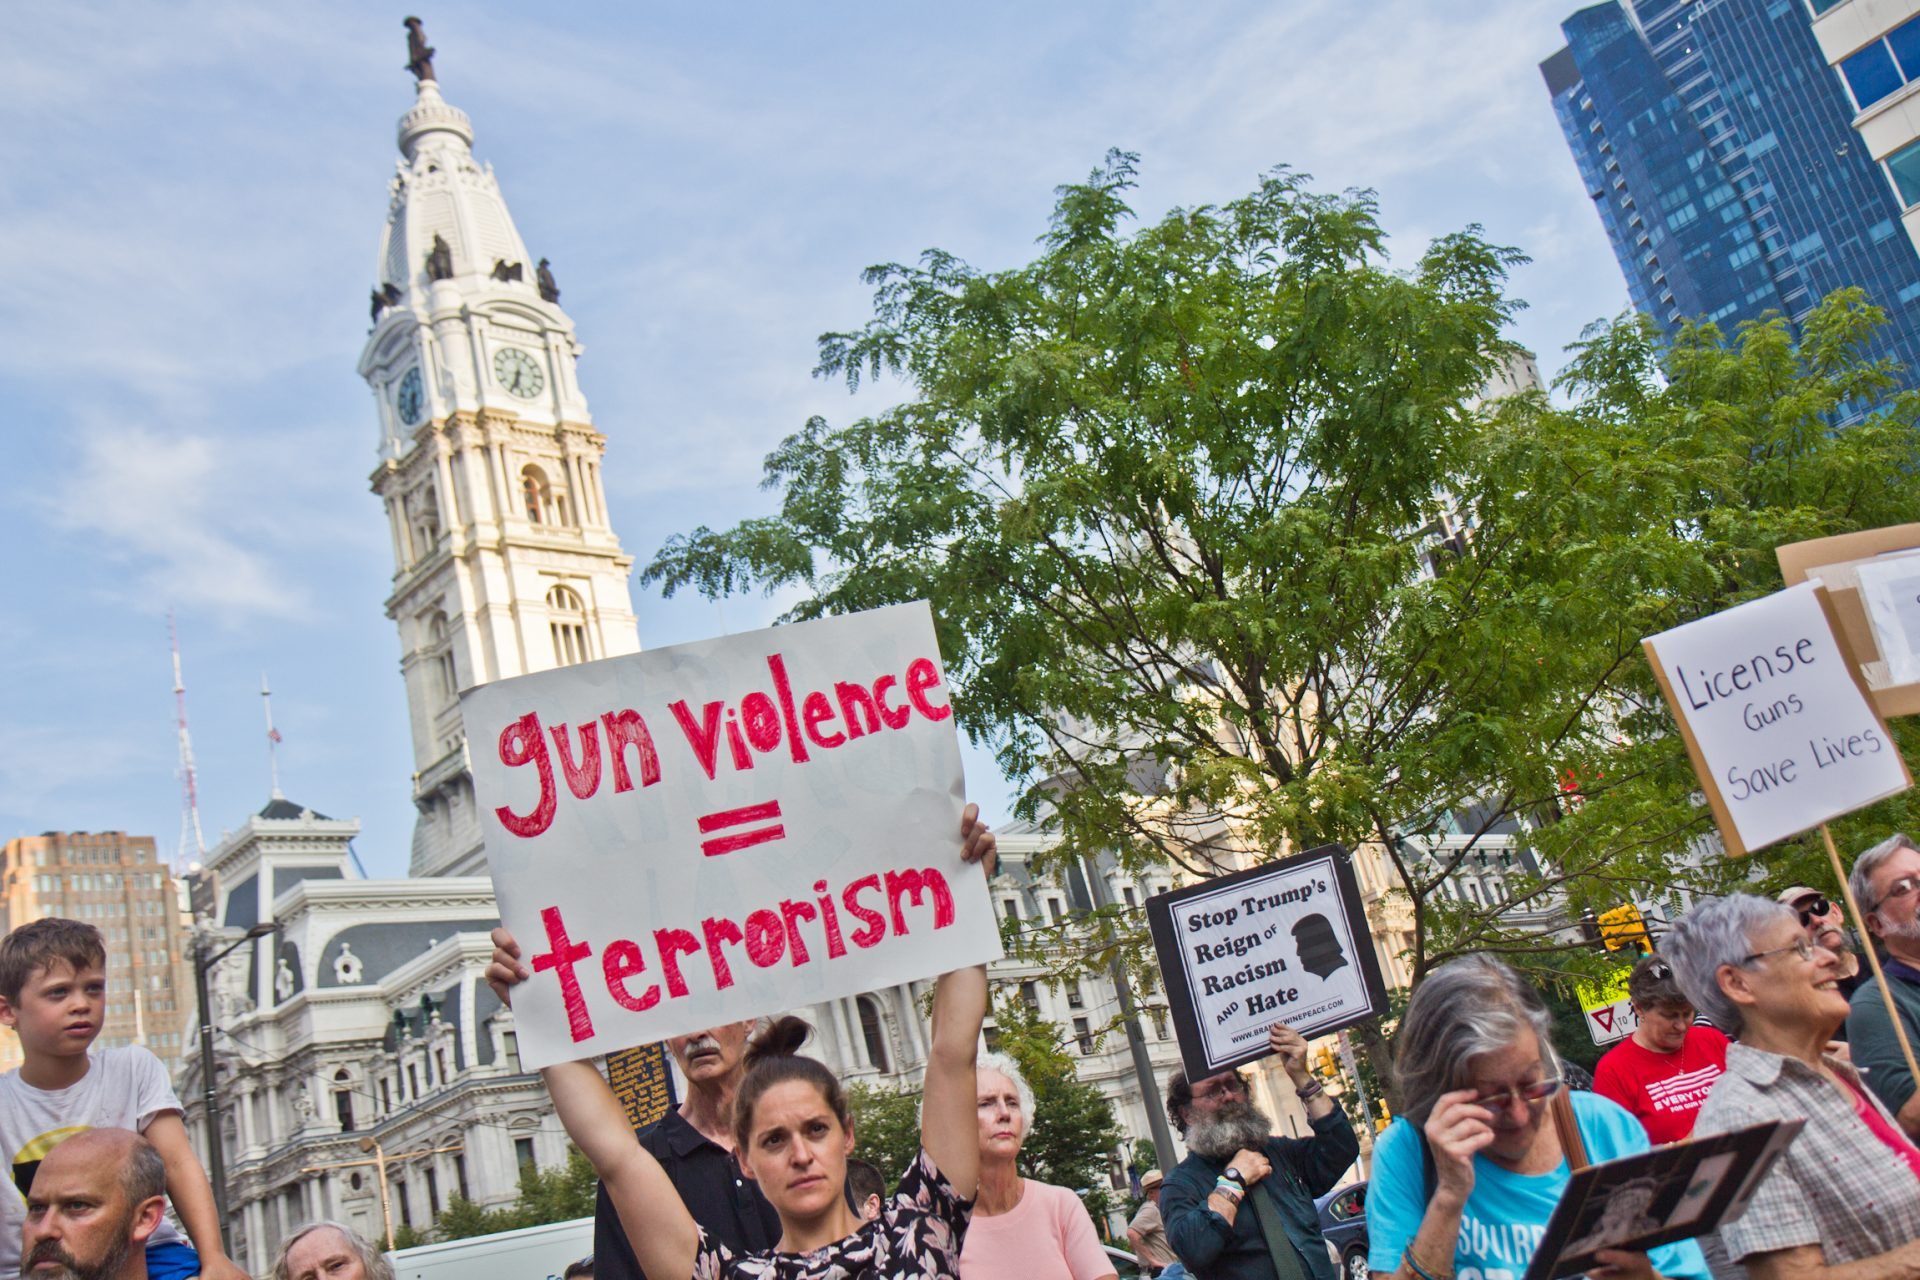 Protestors gathered at Love Park in Philadelphia to stand against gun violence nationally and locally.